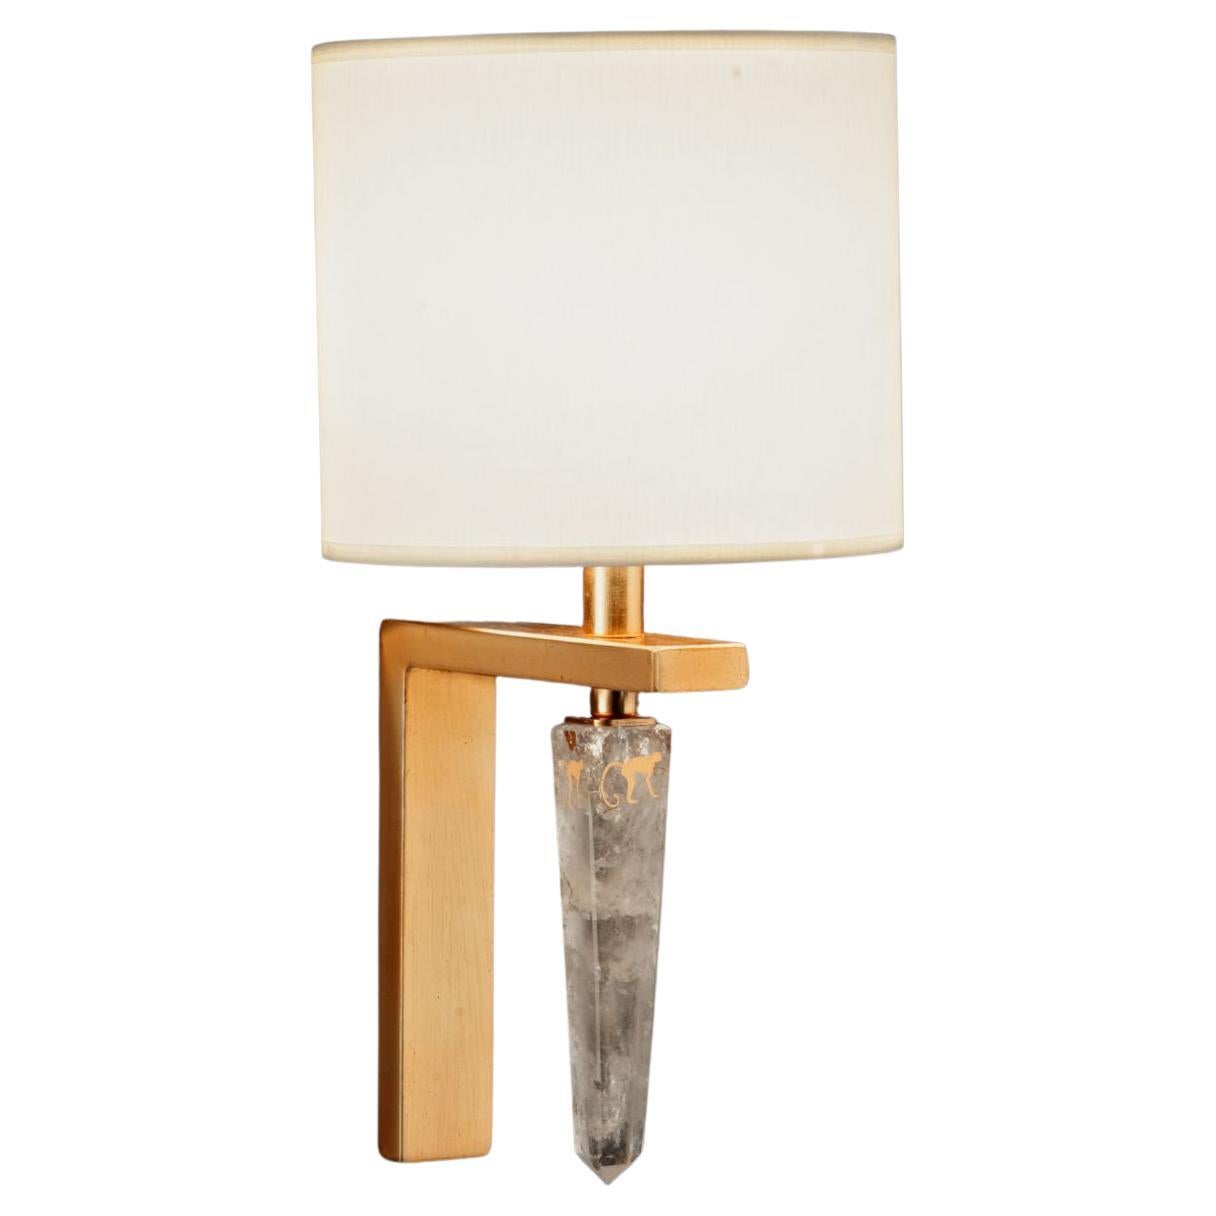 Quartz Wall Sconce by Aver For Sale